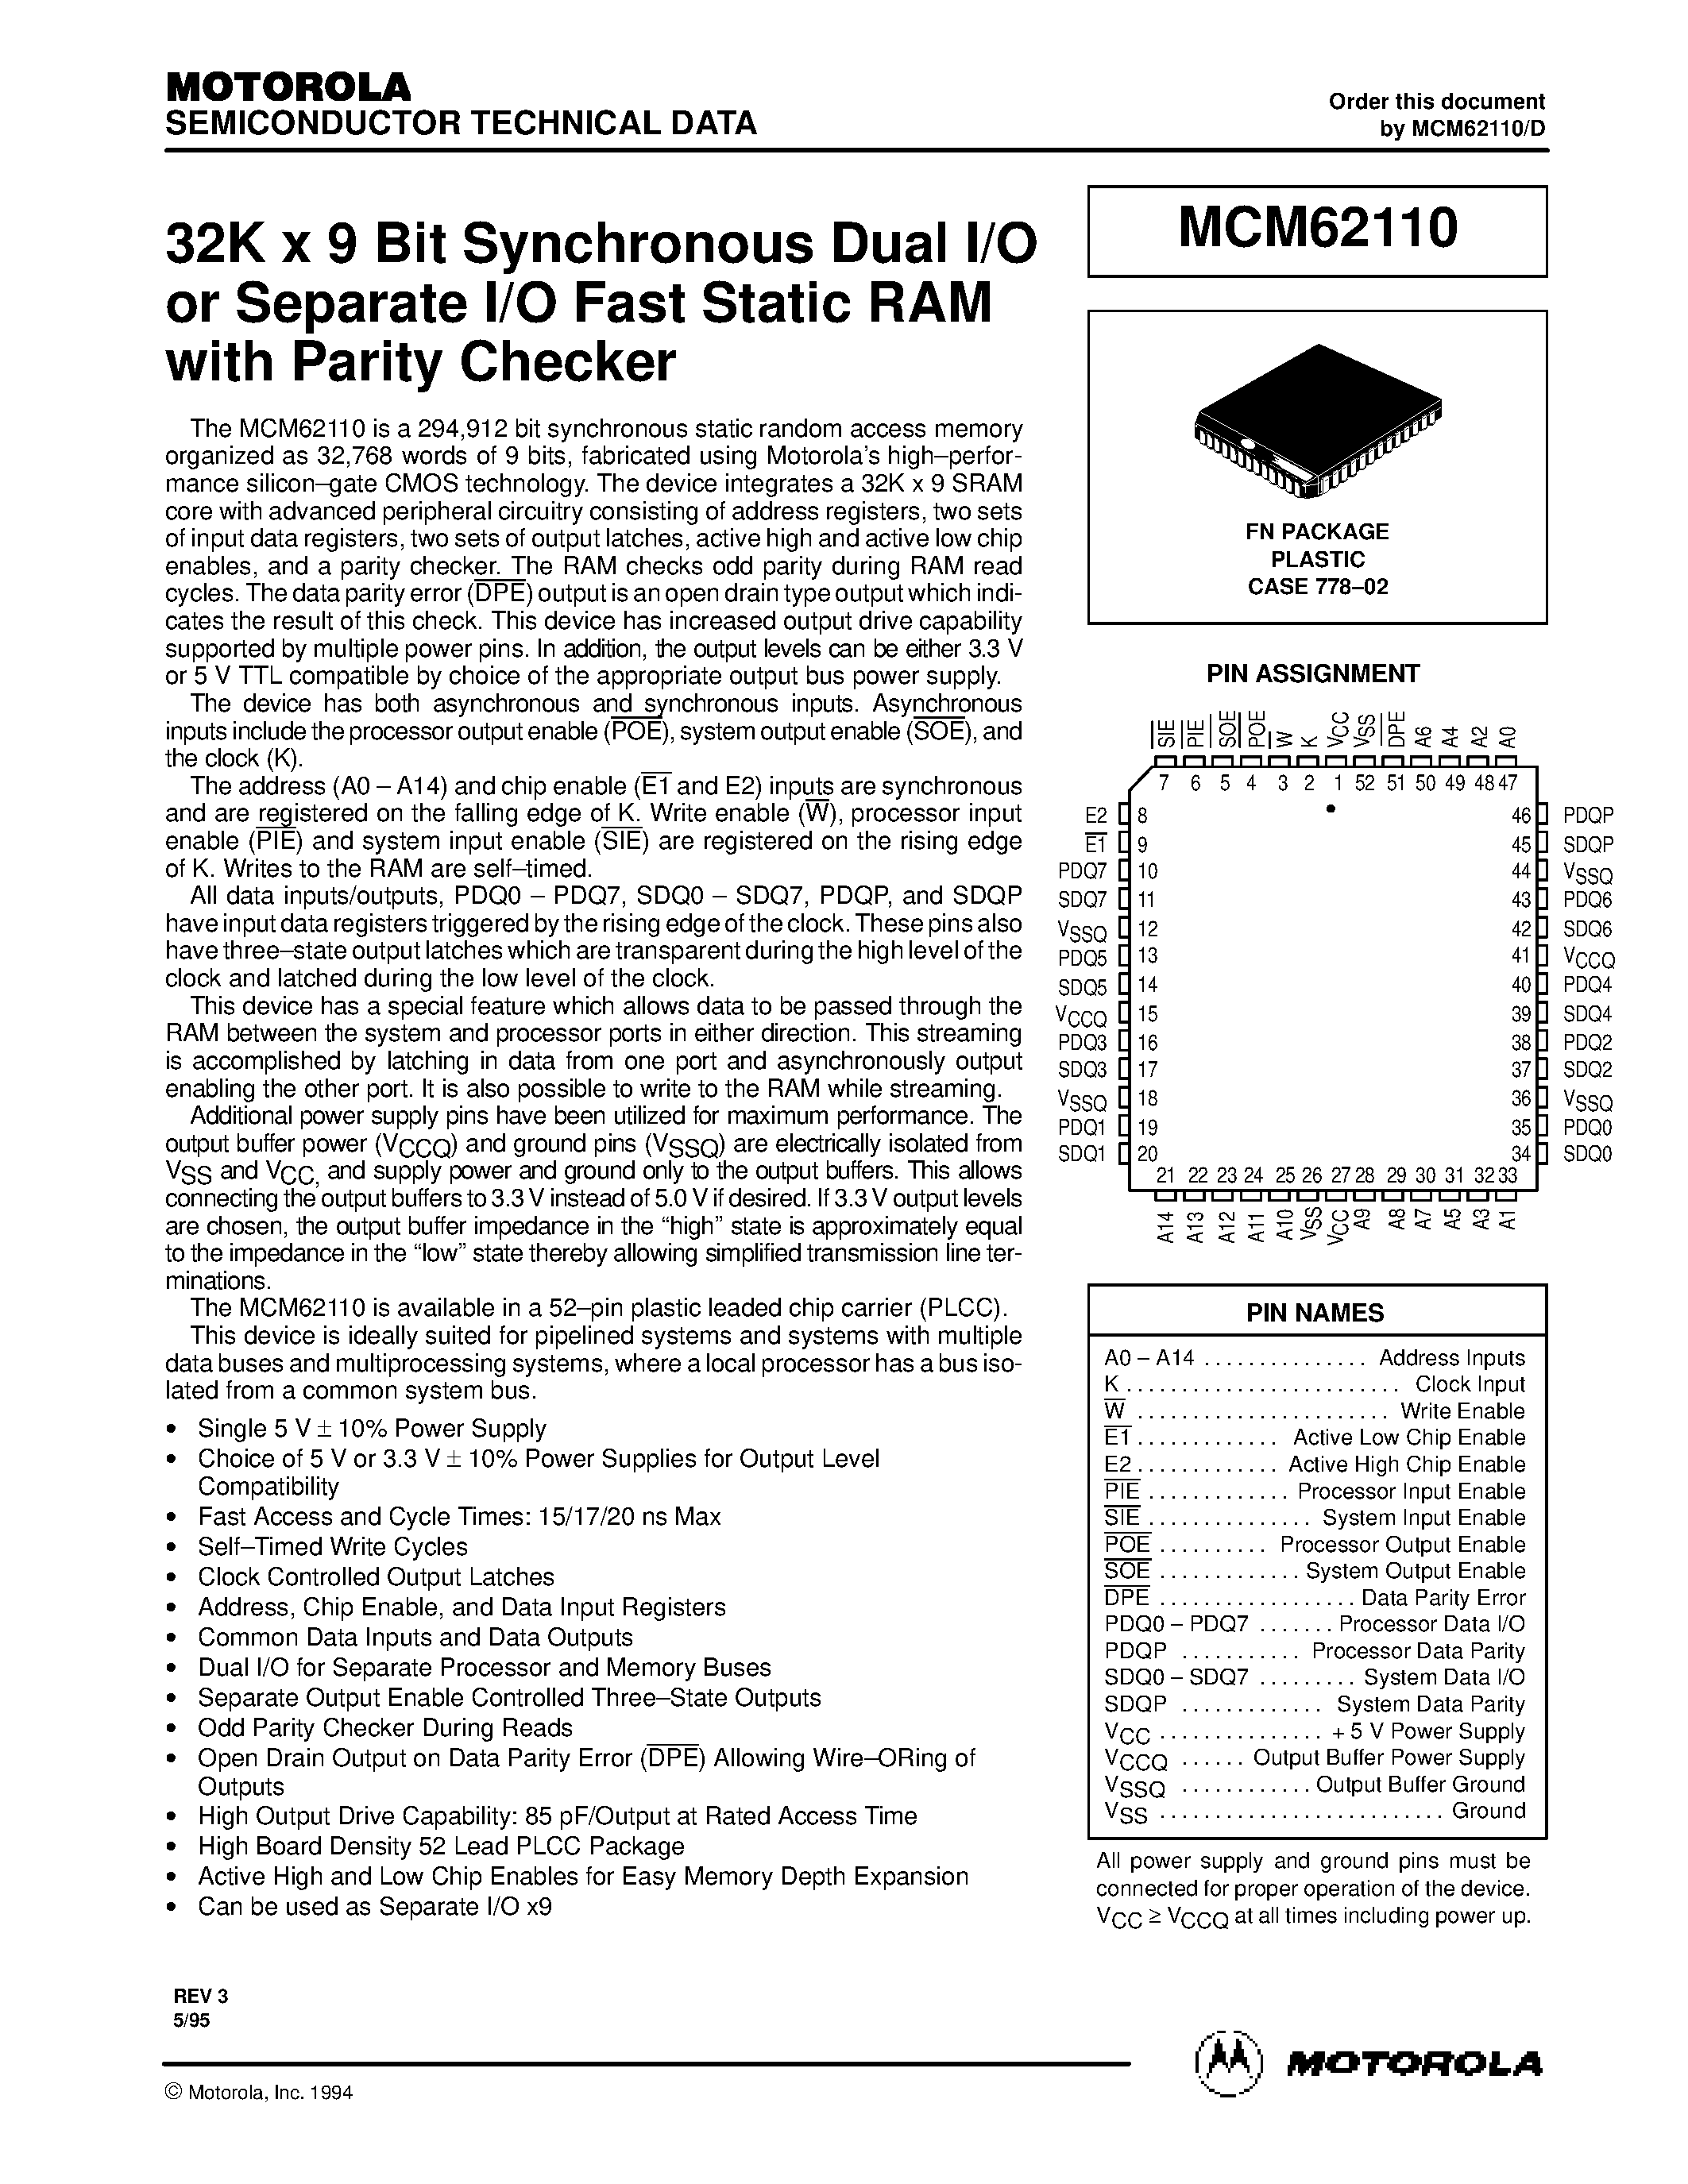 Datasheet MCM62110FN15 - 32K x 9 Bit Synchronous Dual I/O or Separate I/O Fast Static RAM with Parity Checker page 1